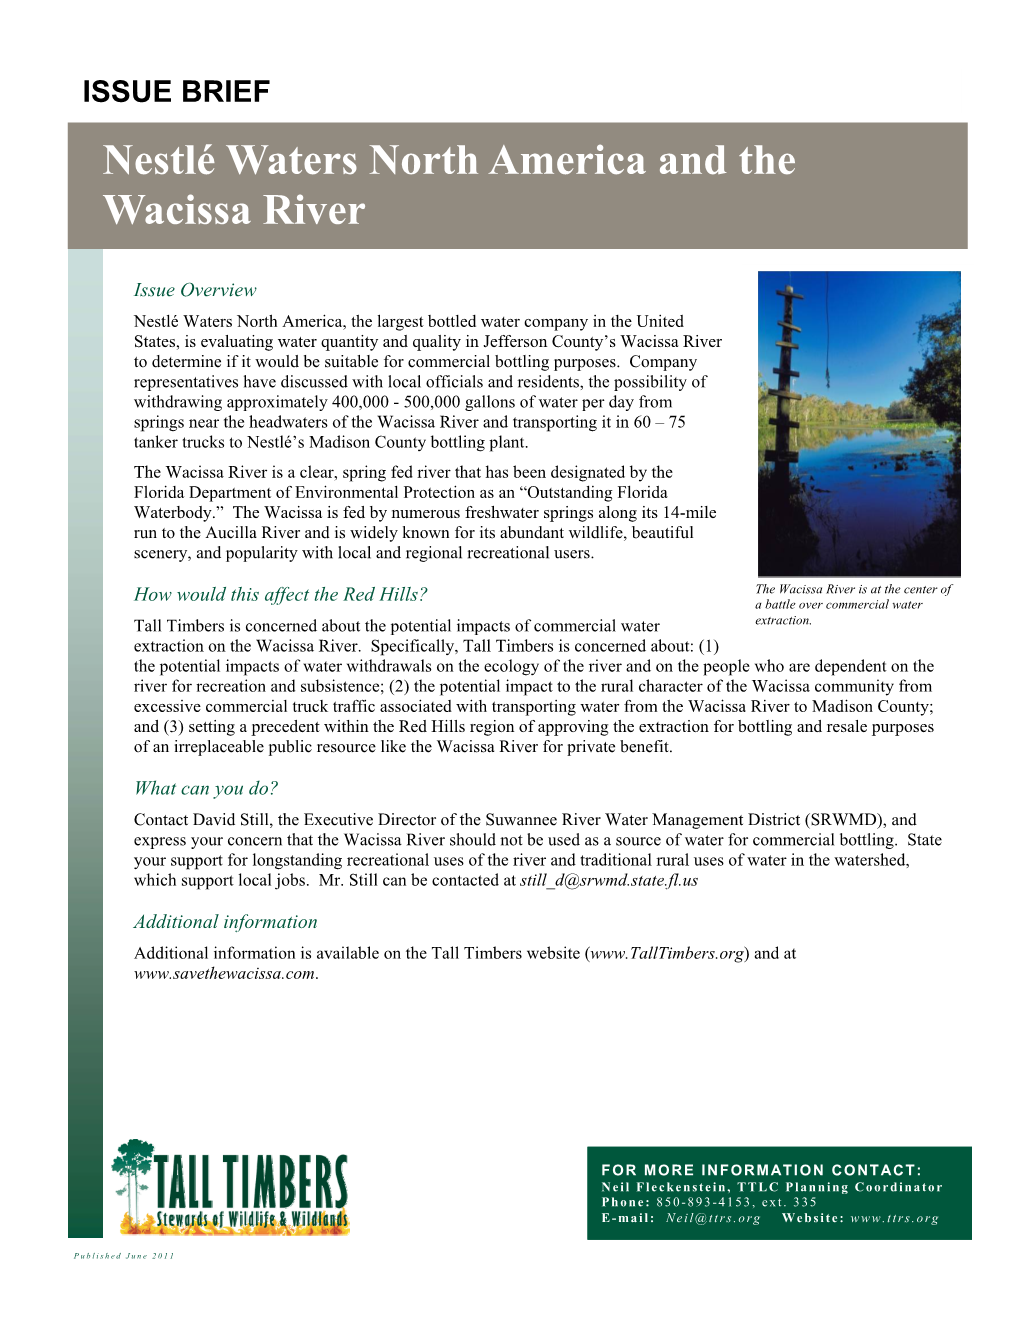 Nestlé Waters North America and the Wacissa River